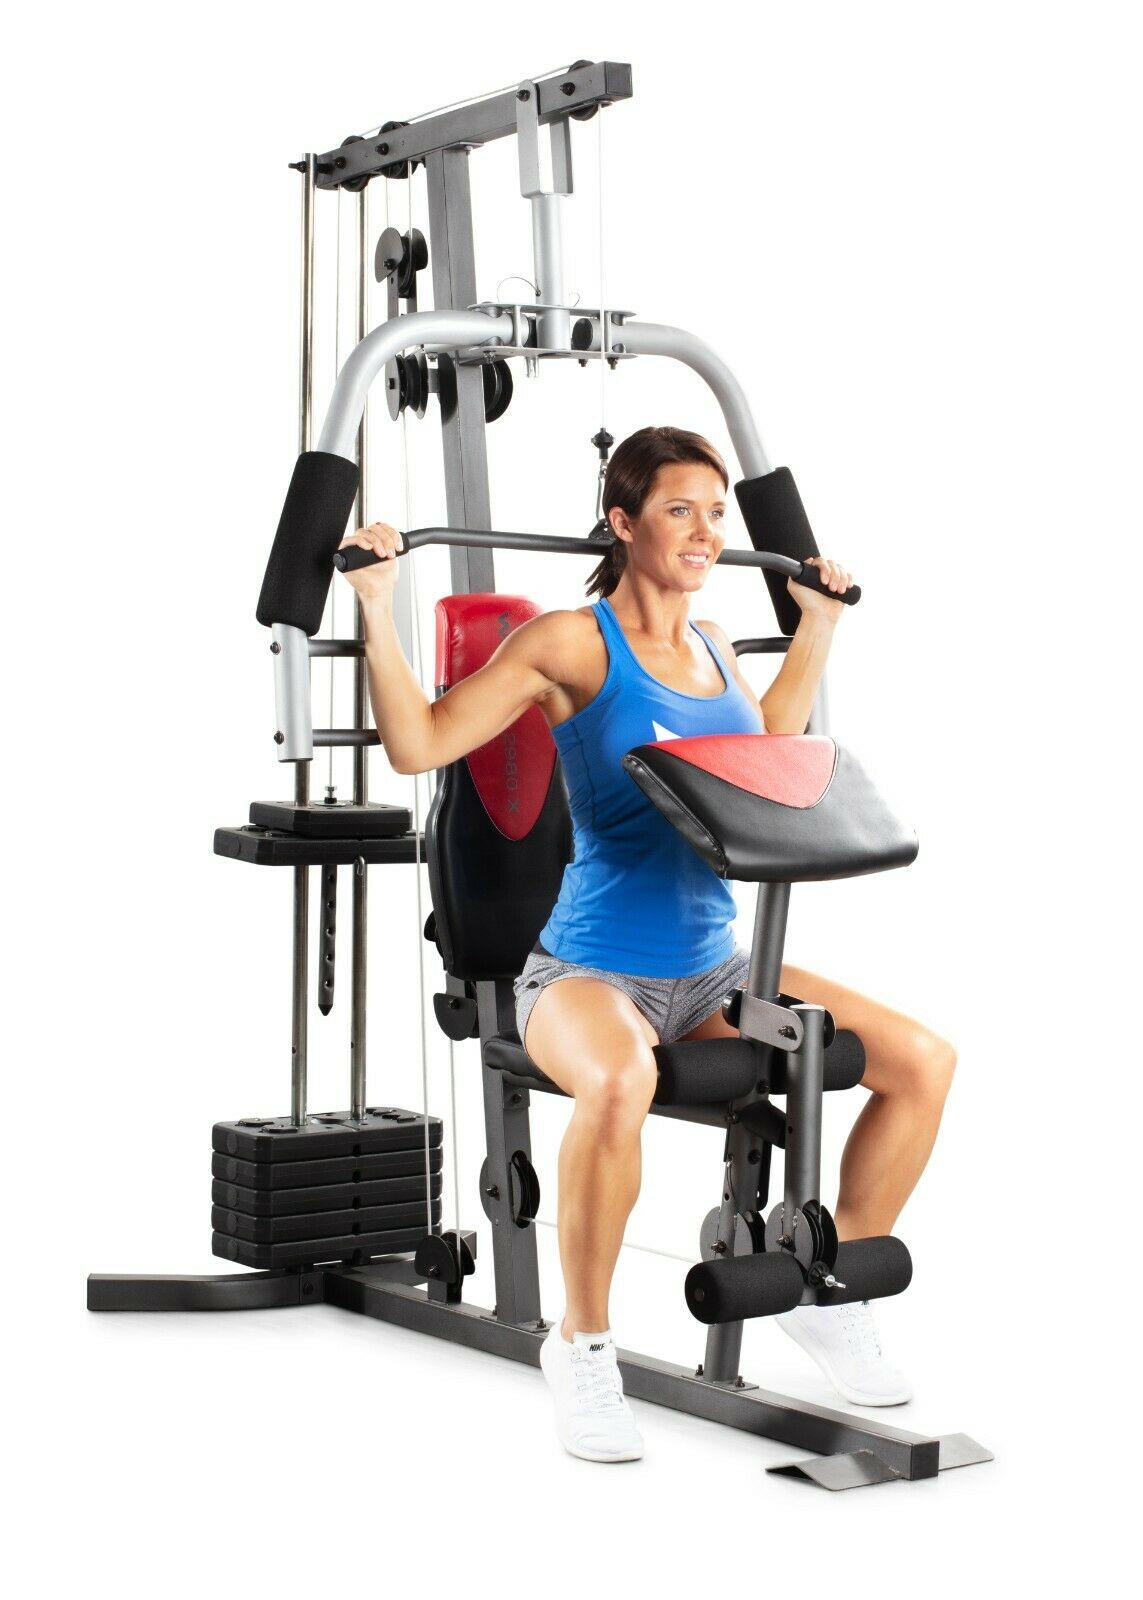 Of Resistance Red/Black Exercise at Home Weider 2980 Home Gym With 214 Lbs 